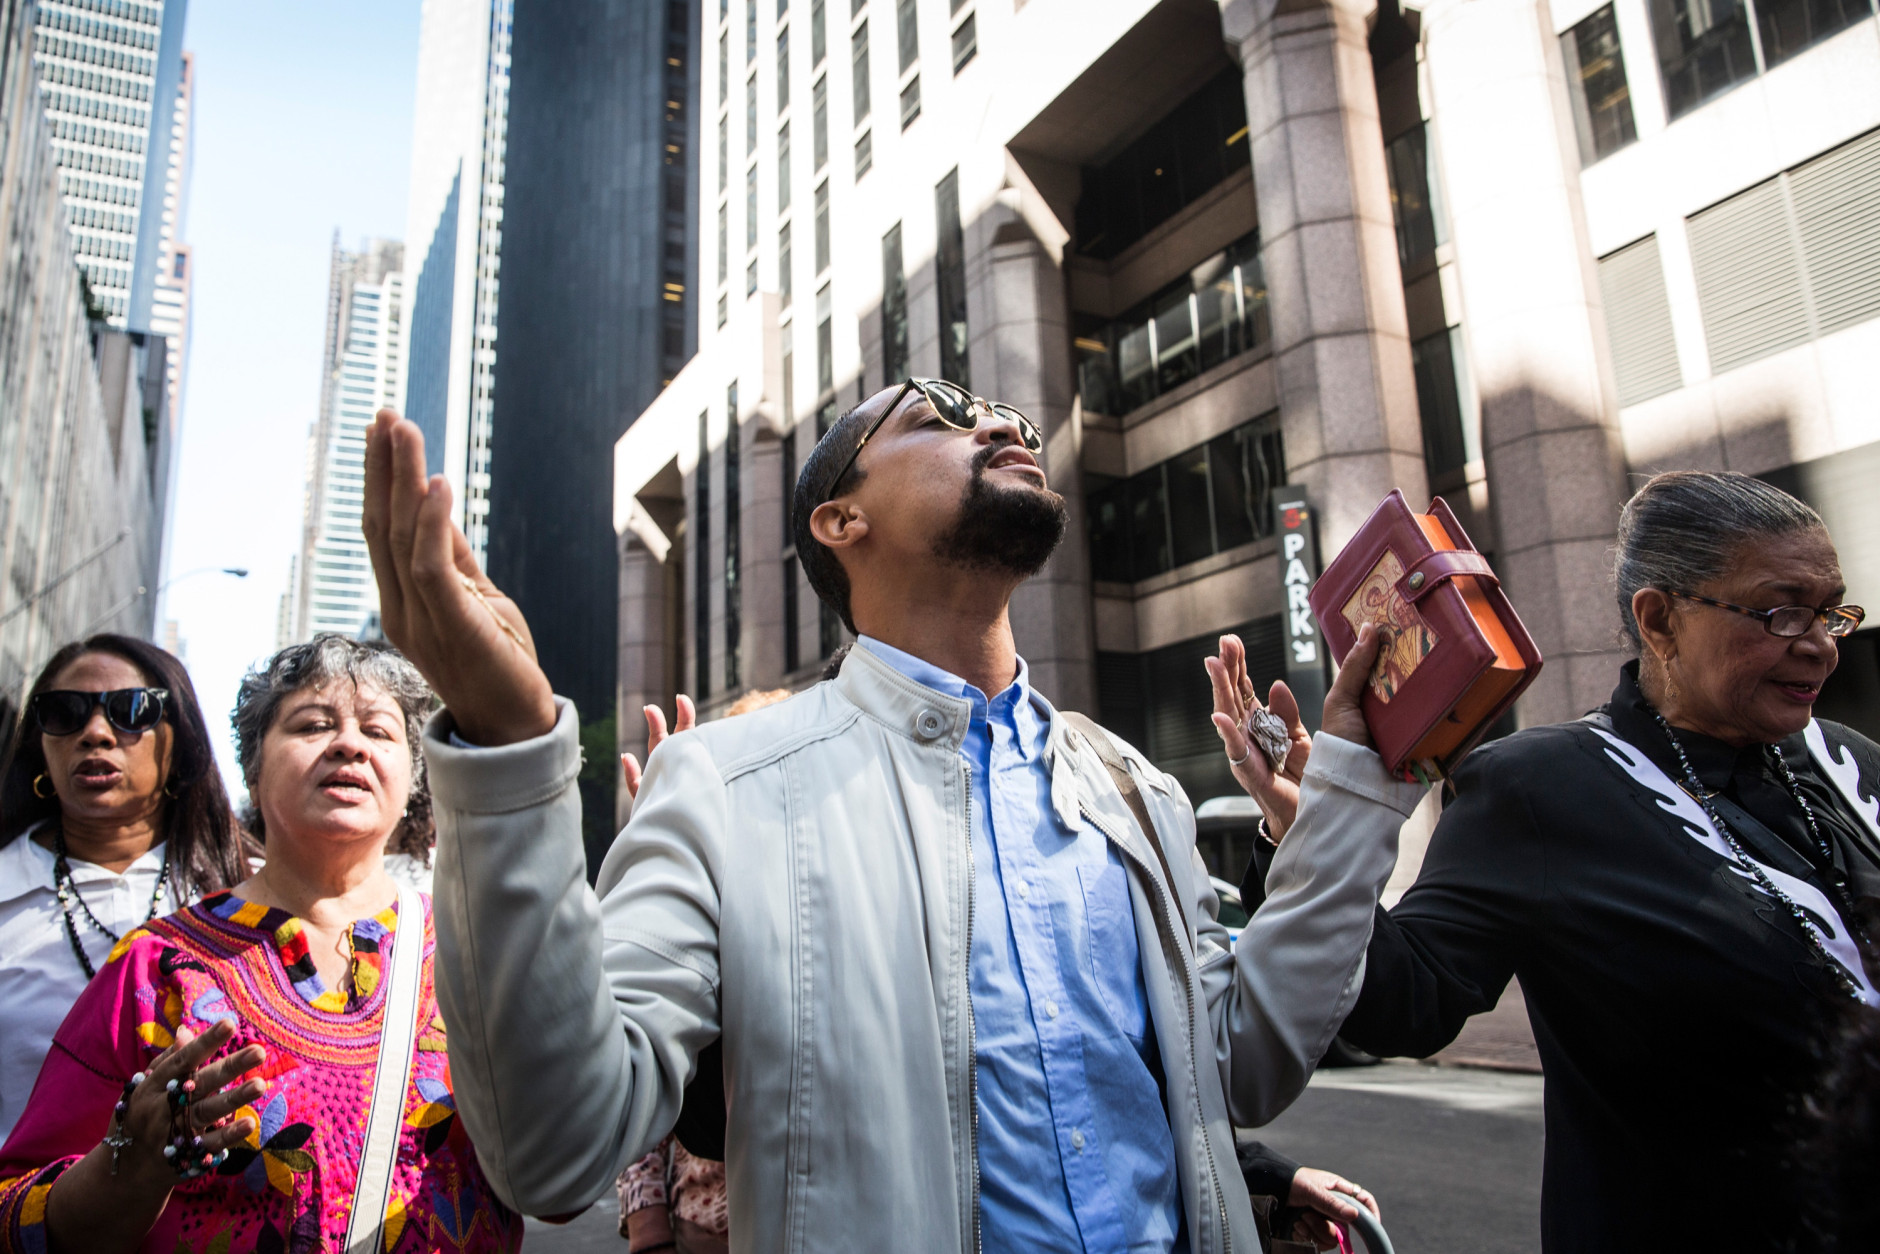 NEW YORK, NY - SEPTEMBER 24:  Yankei Mauricio leads prayers while waiting in line to stand along 5th Avenue to watch as Pope Francis drives by while he is en route to St. Patrick's Cathedral on September 24, 2015 in New York City.  The Pope will speak tonight at St. Patrick's Cathedral; he is scheduled to land at John F. Kennedy Airport at 5P.M. this evening.  (Photo by Andrew Burton/Getty Images)